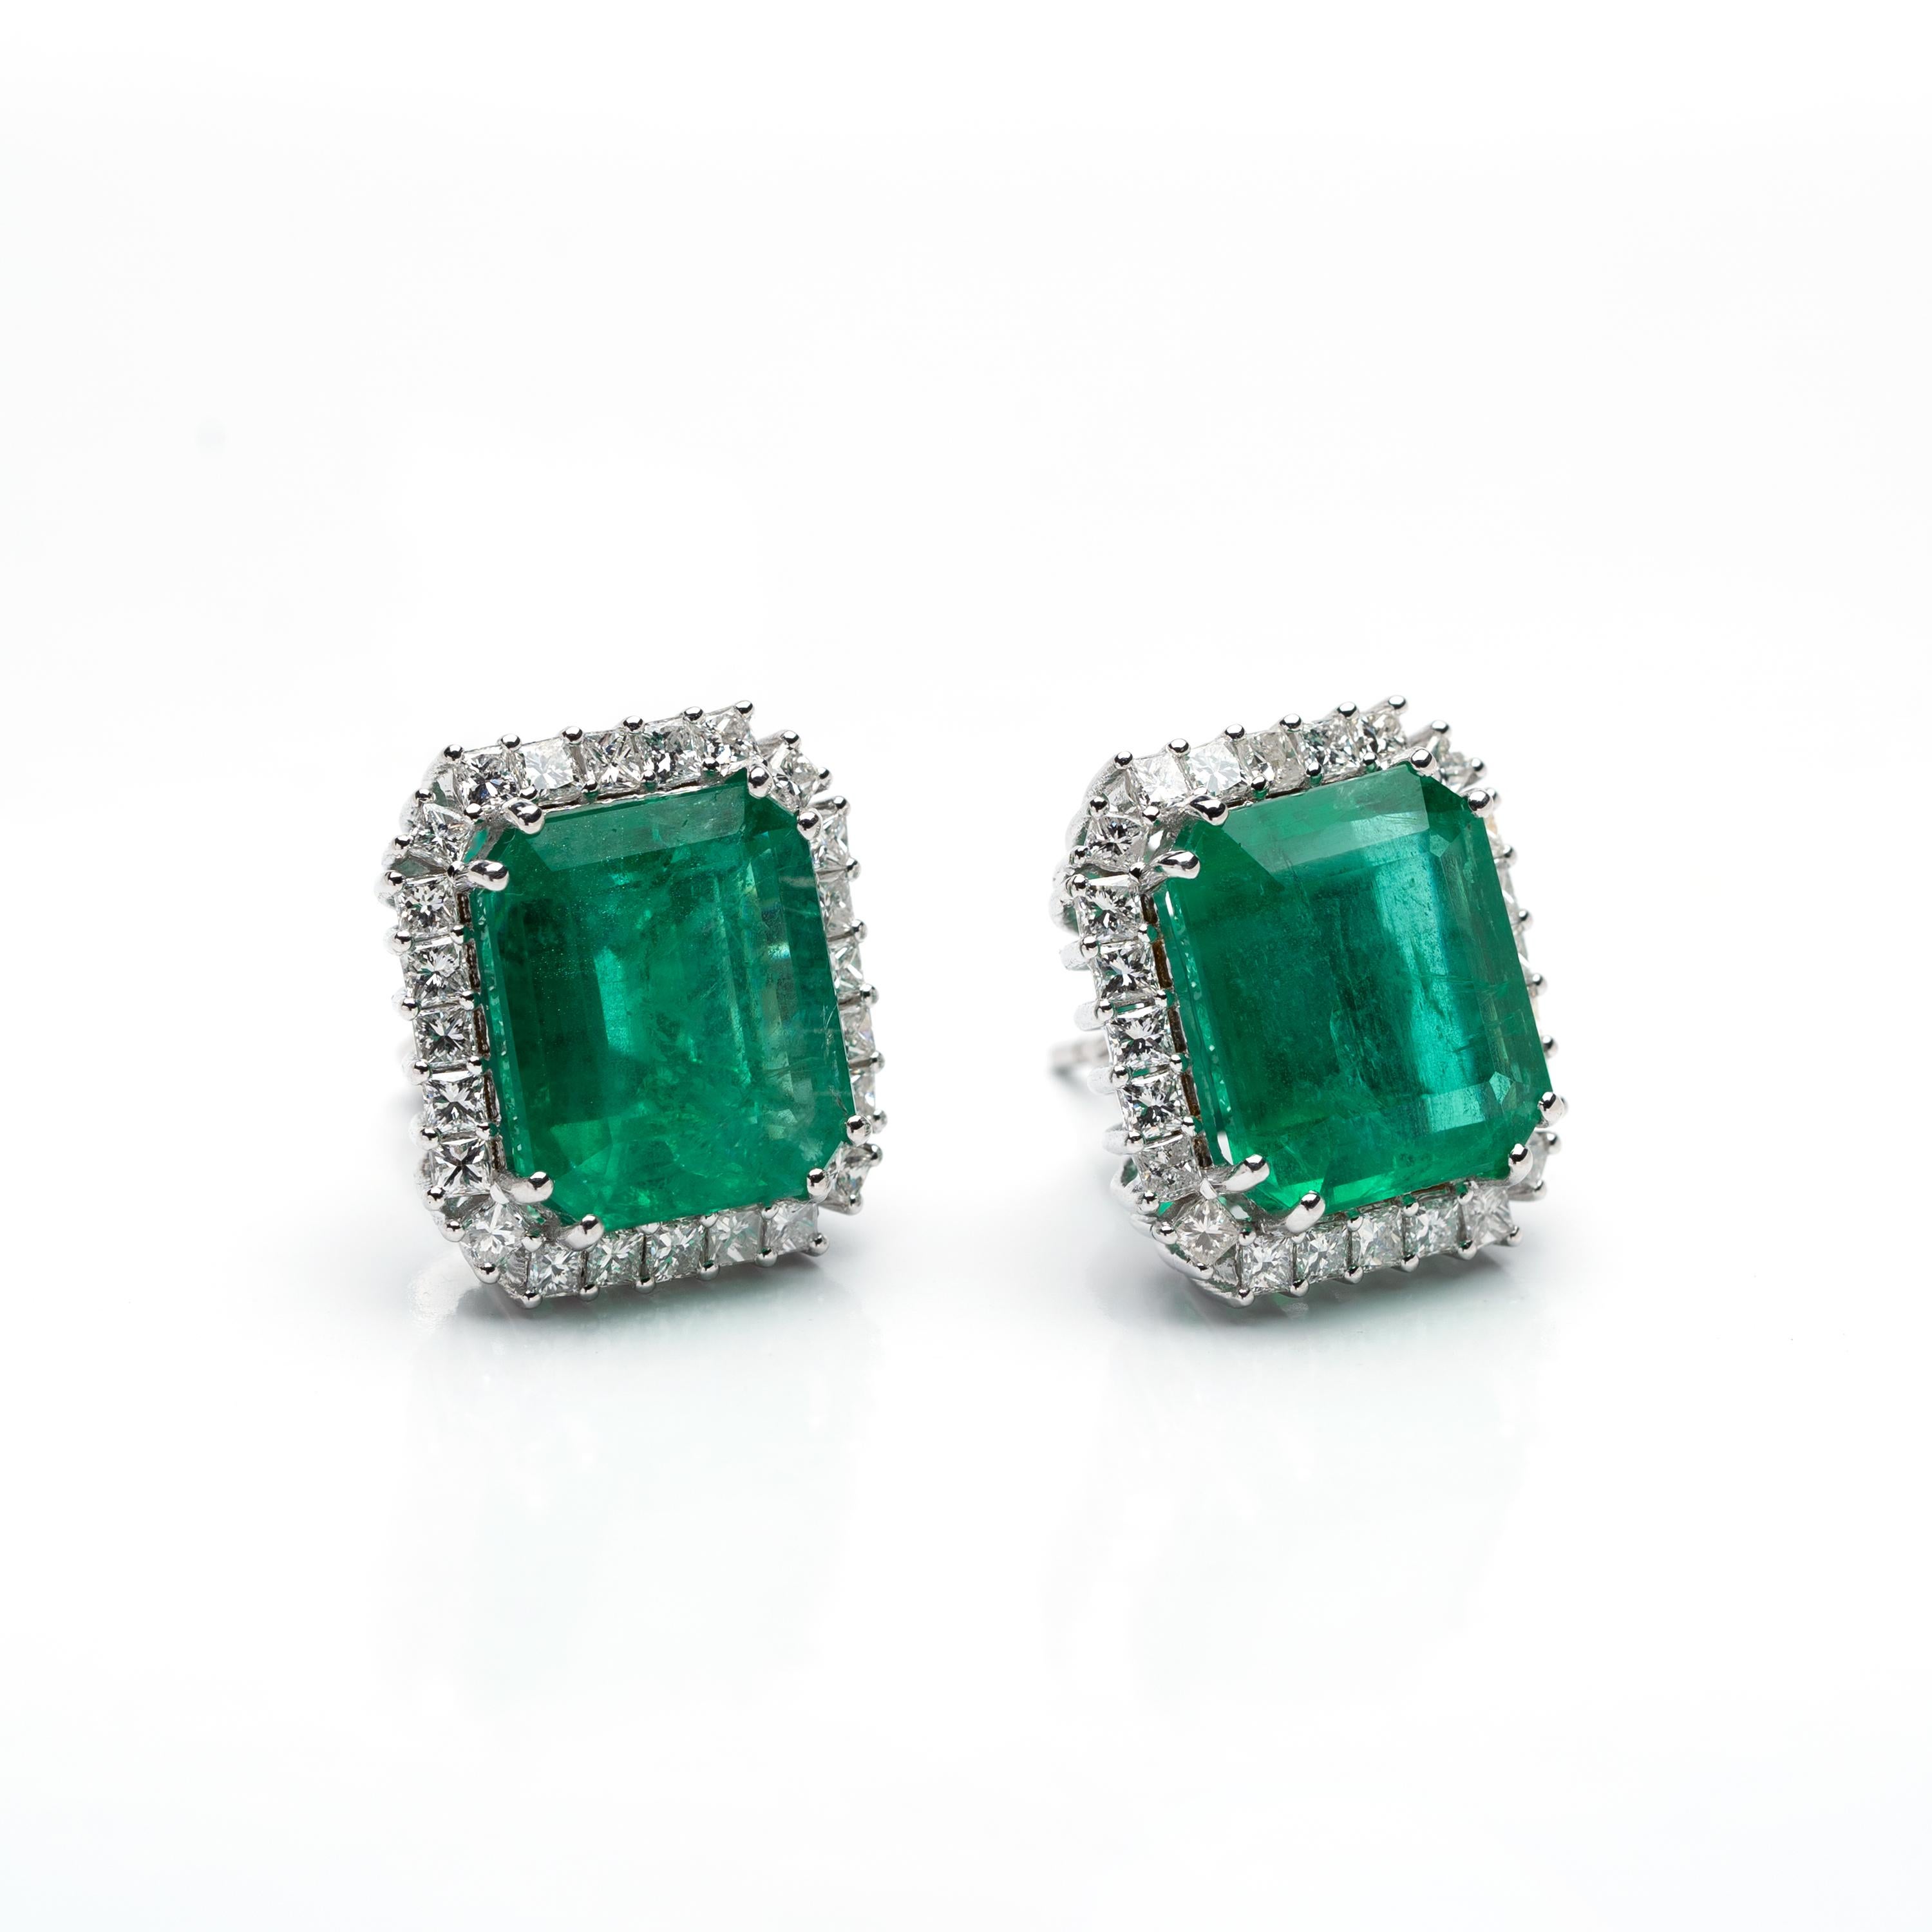 Emerald Cut Natural Zambian Emerald Earrings with 11.06 Carats Emeralds in 14k Gold For Sale